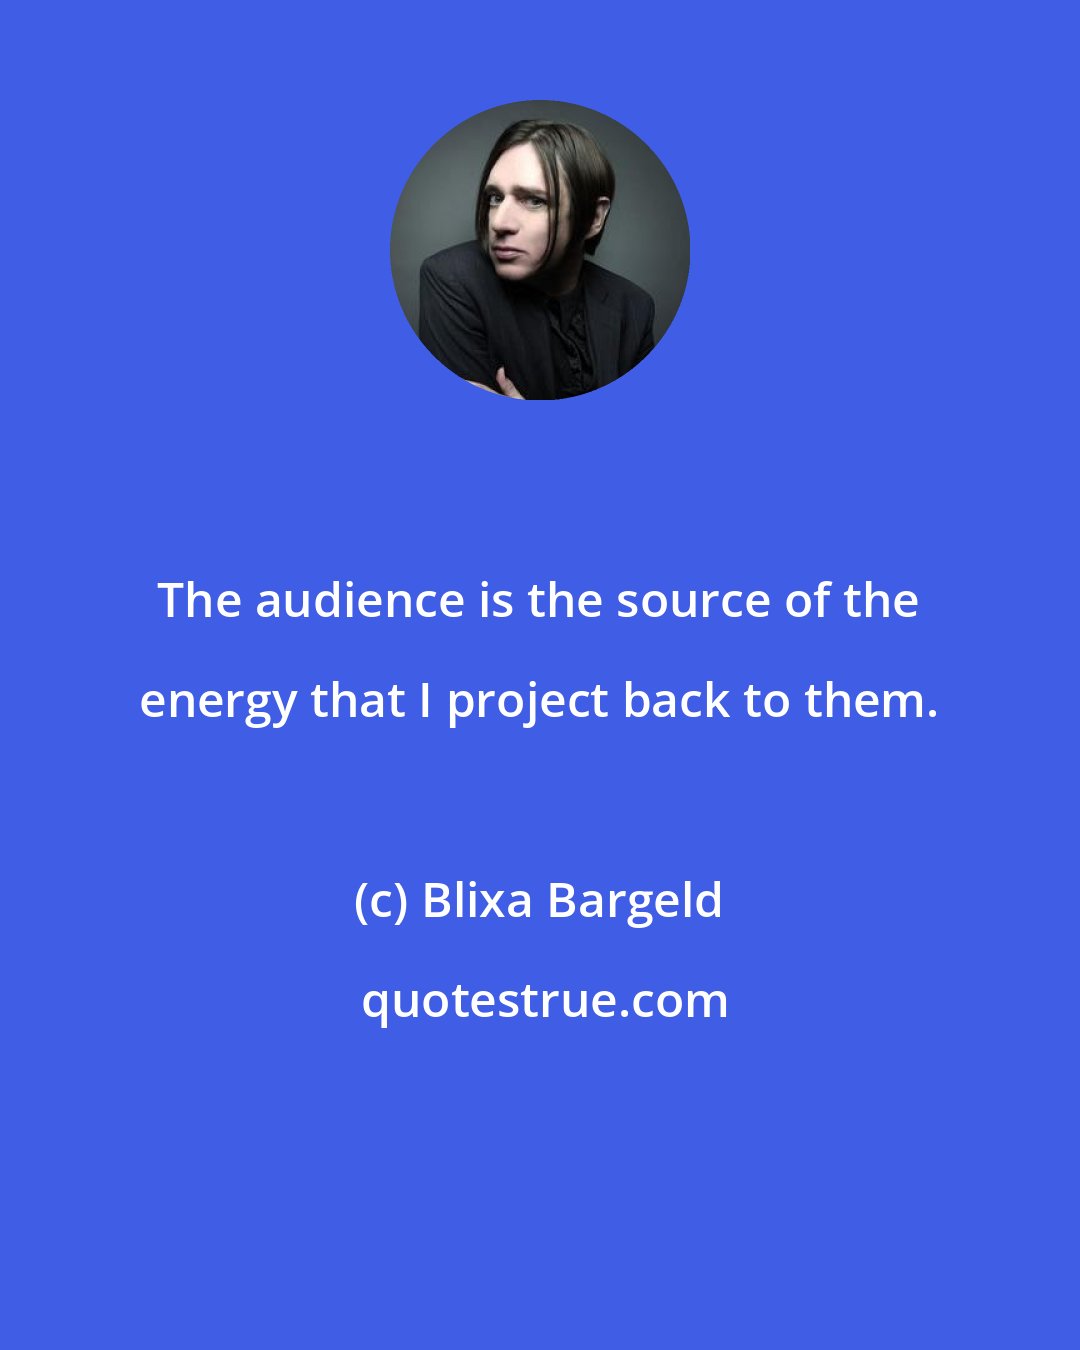 Blixa Bargeld: The audience is the source of the energy that I project back to them.